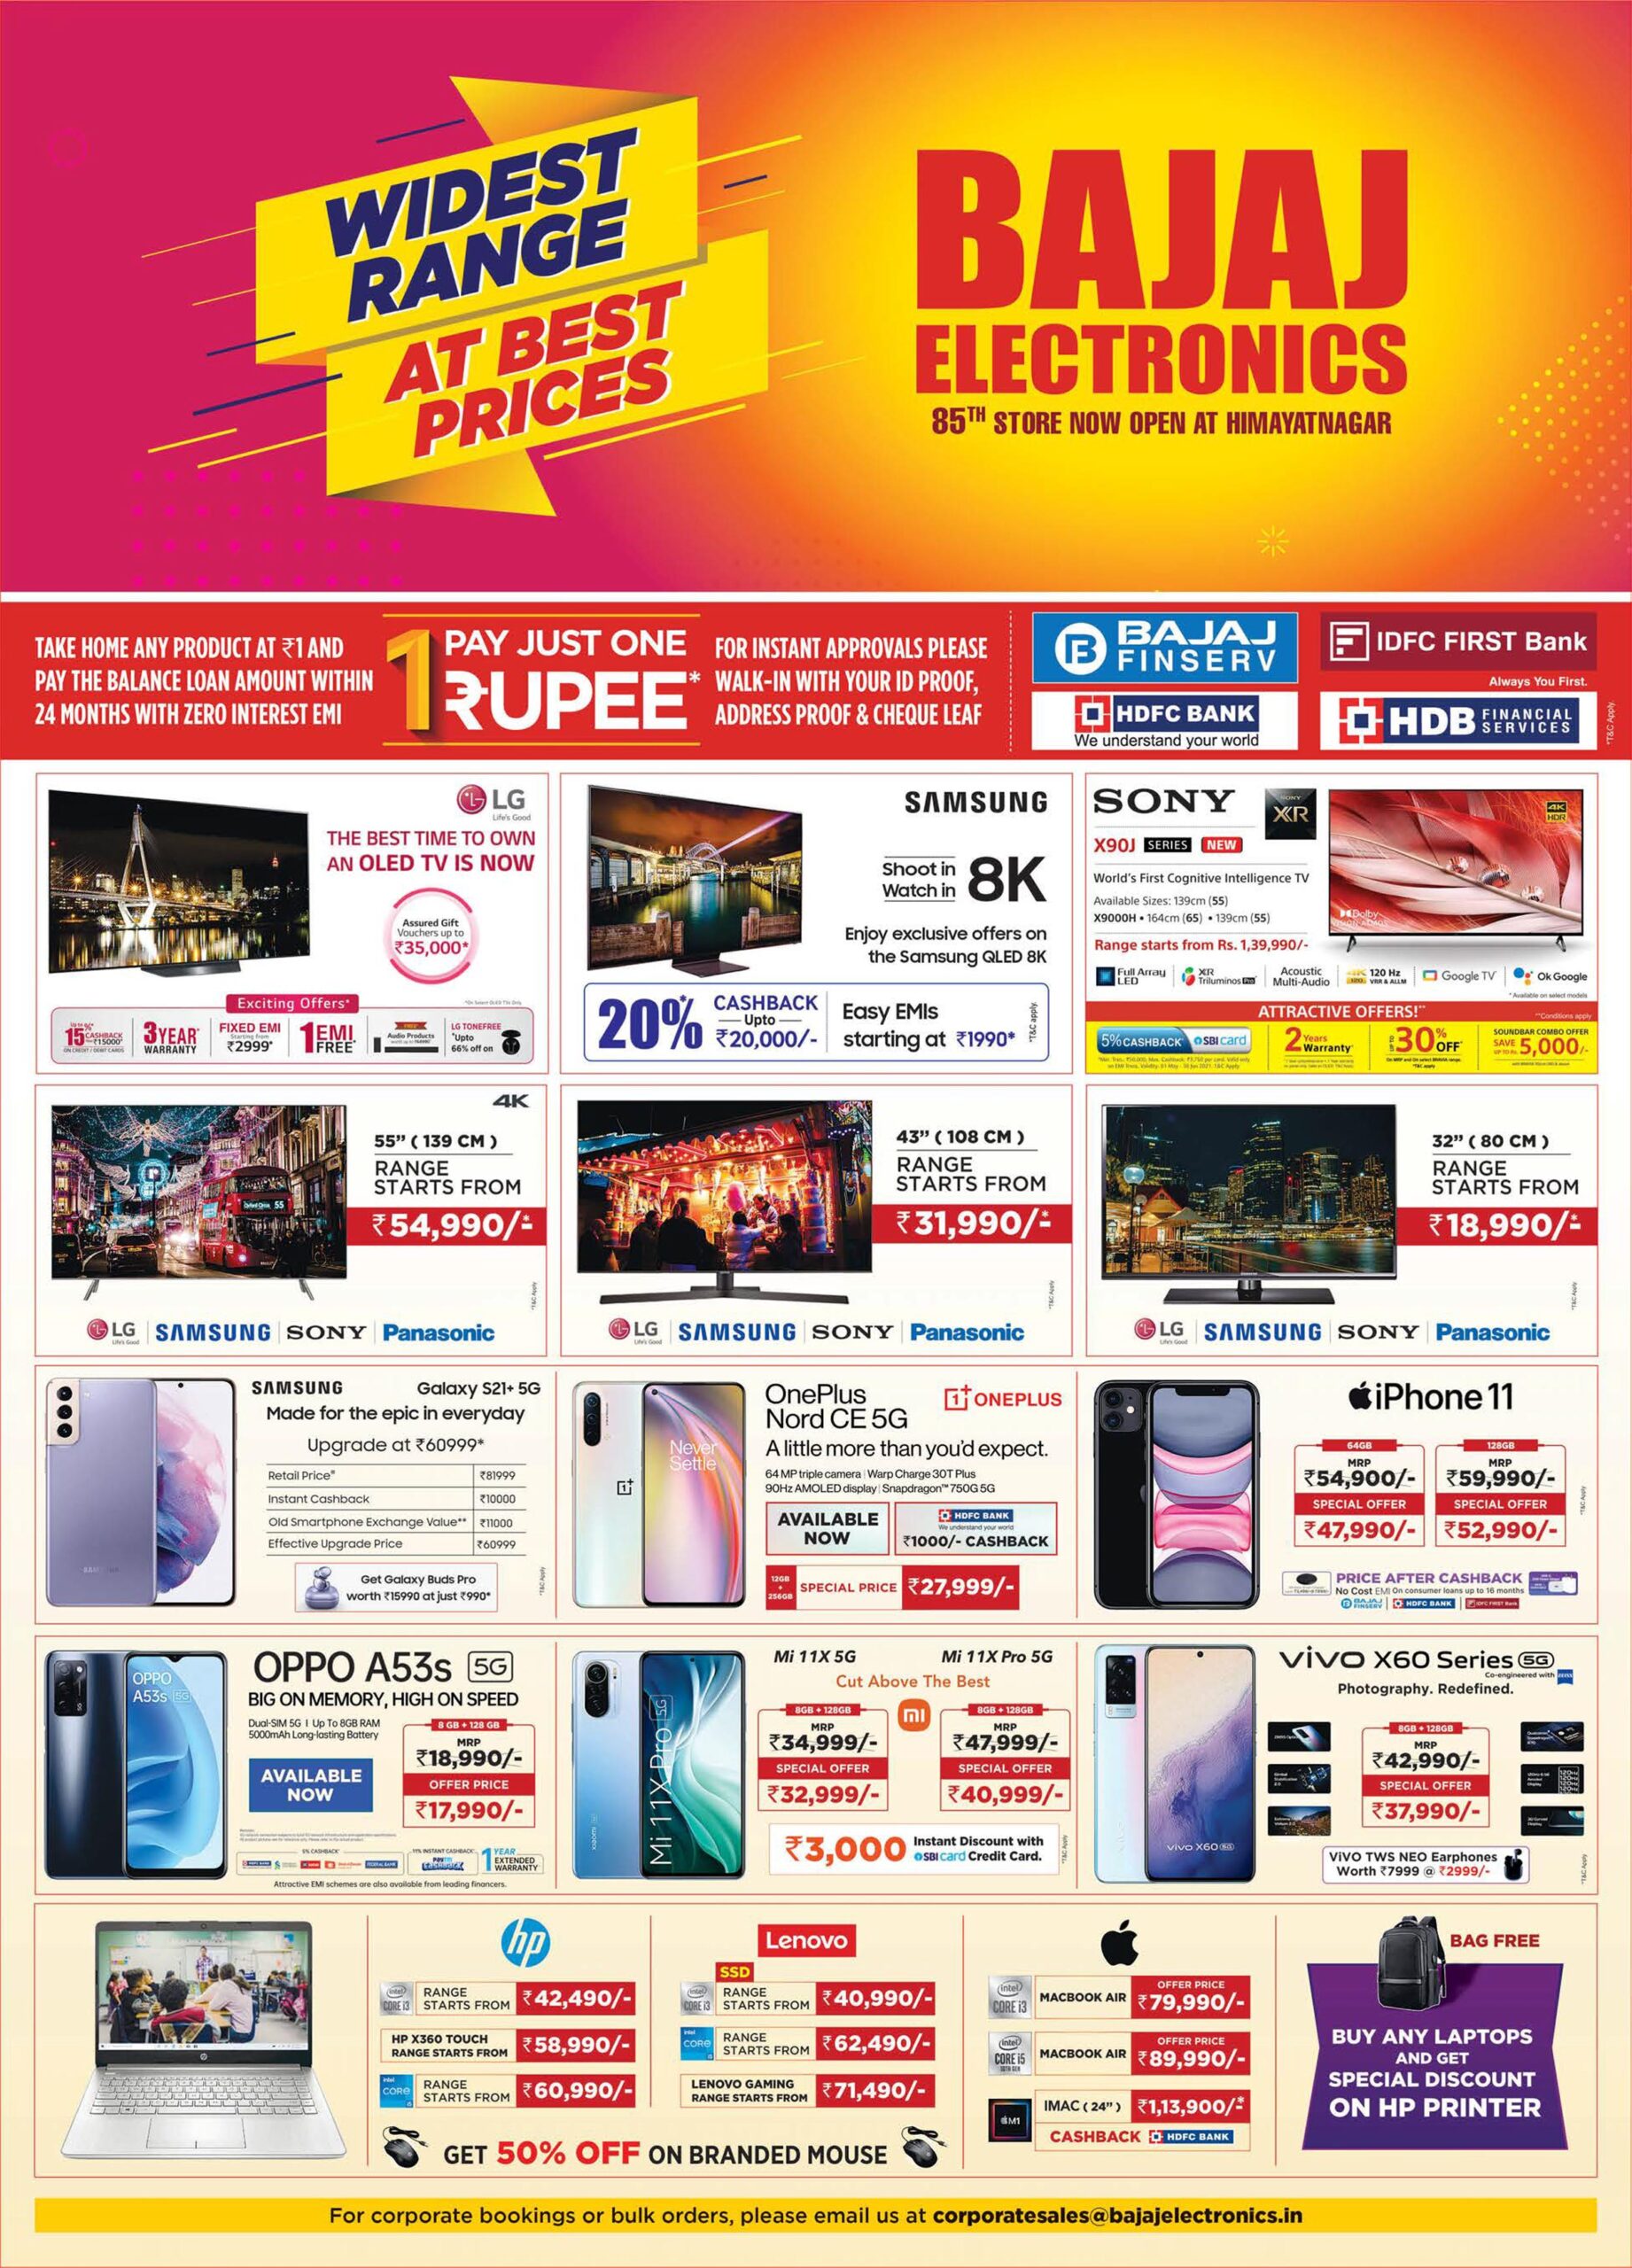 bajaj-electronics-widest-range-at-best-prices-pay-just-one-rupee-and-take-any-product-ad-deccan-chronicle-hyderabad-10-7-2021